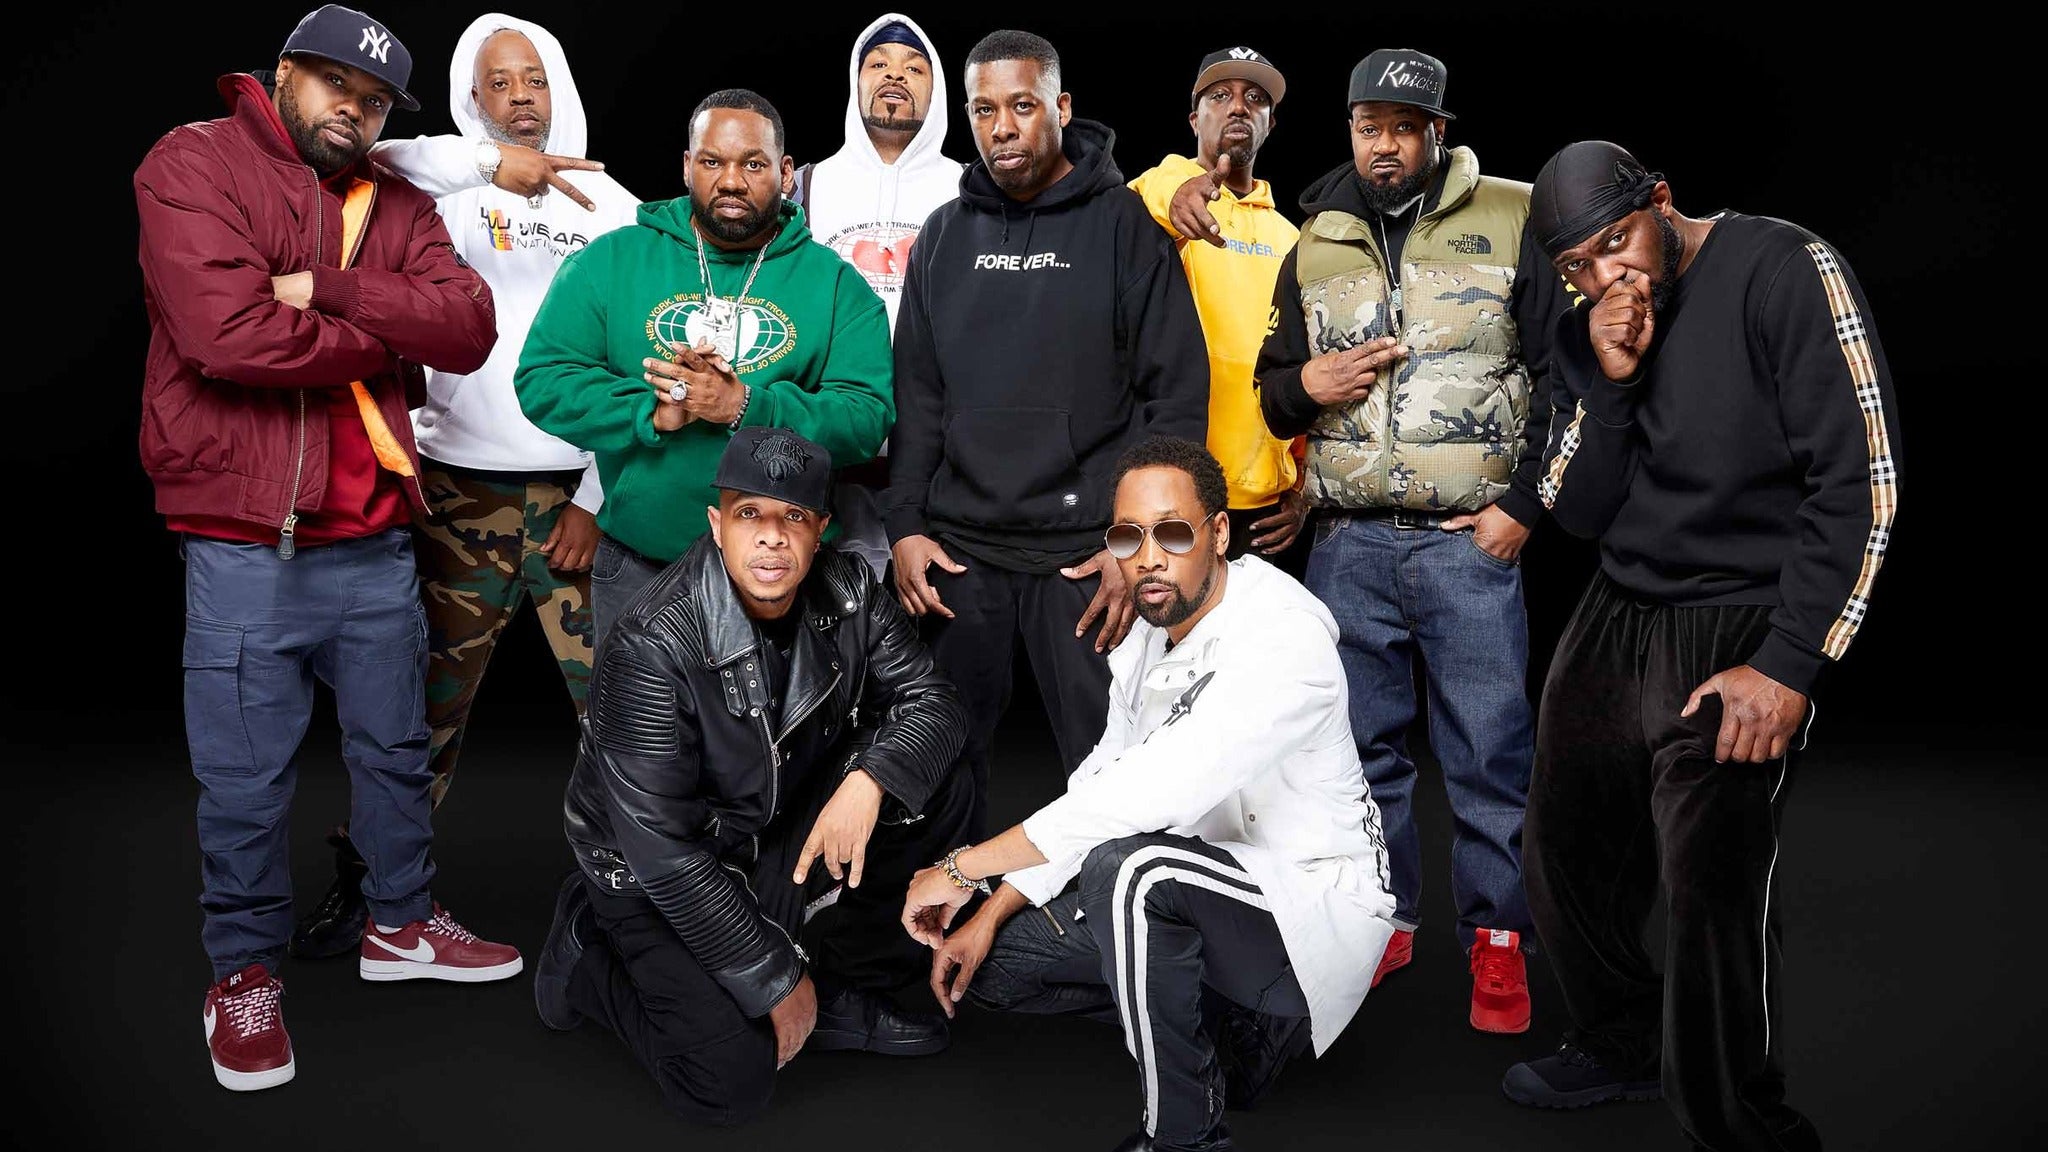 Wu-Tang Clan pre-sale password for early tickets in Vancouver